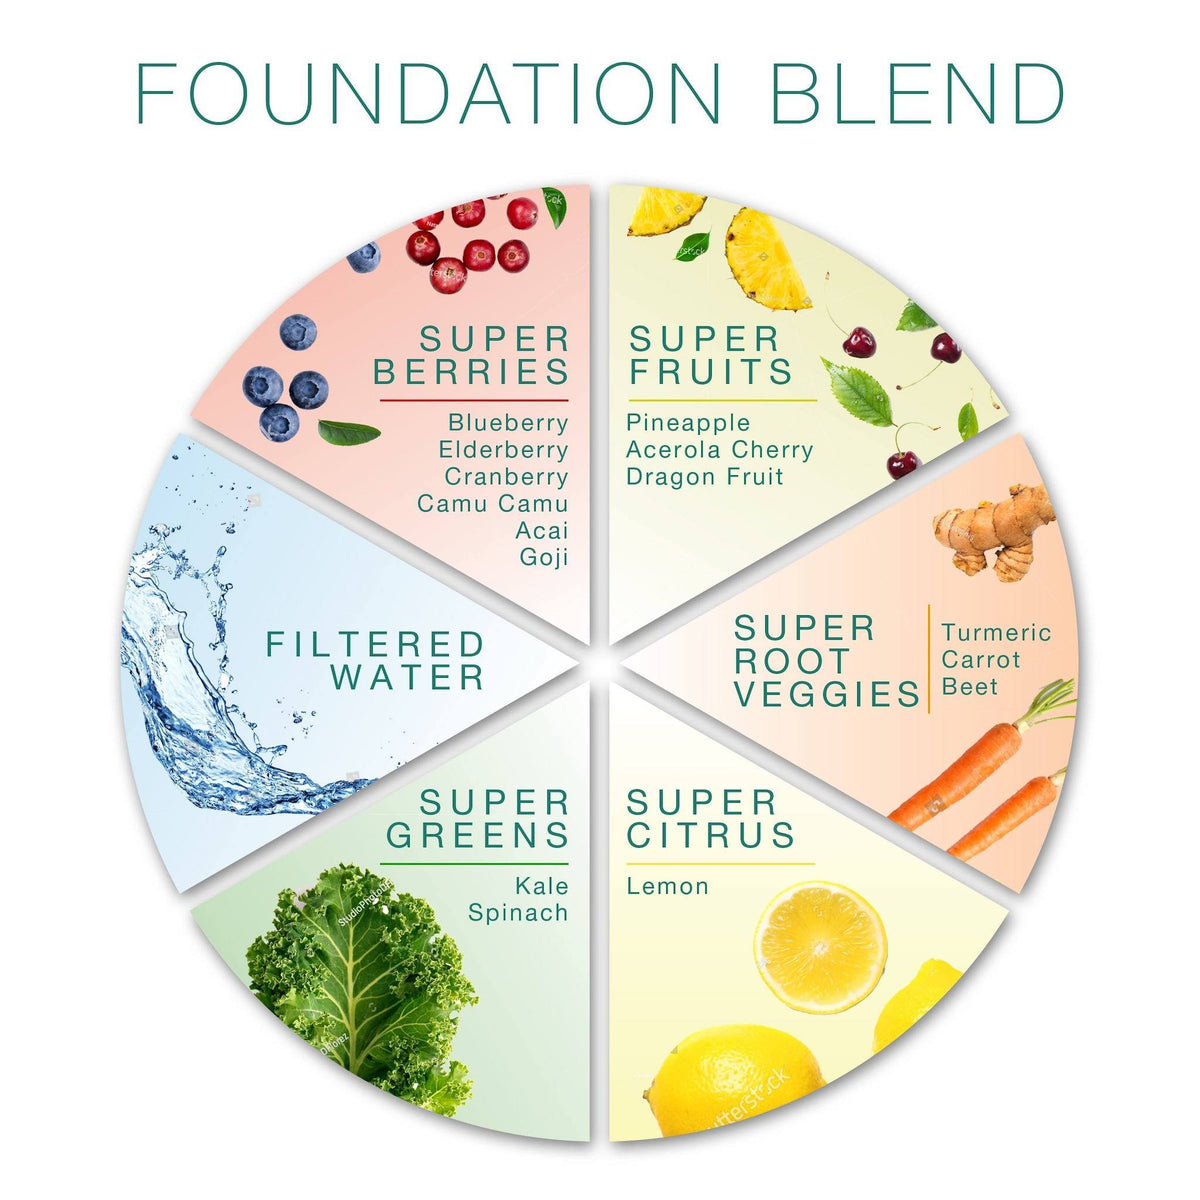 The Foundation Blend